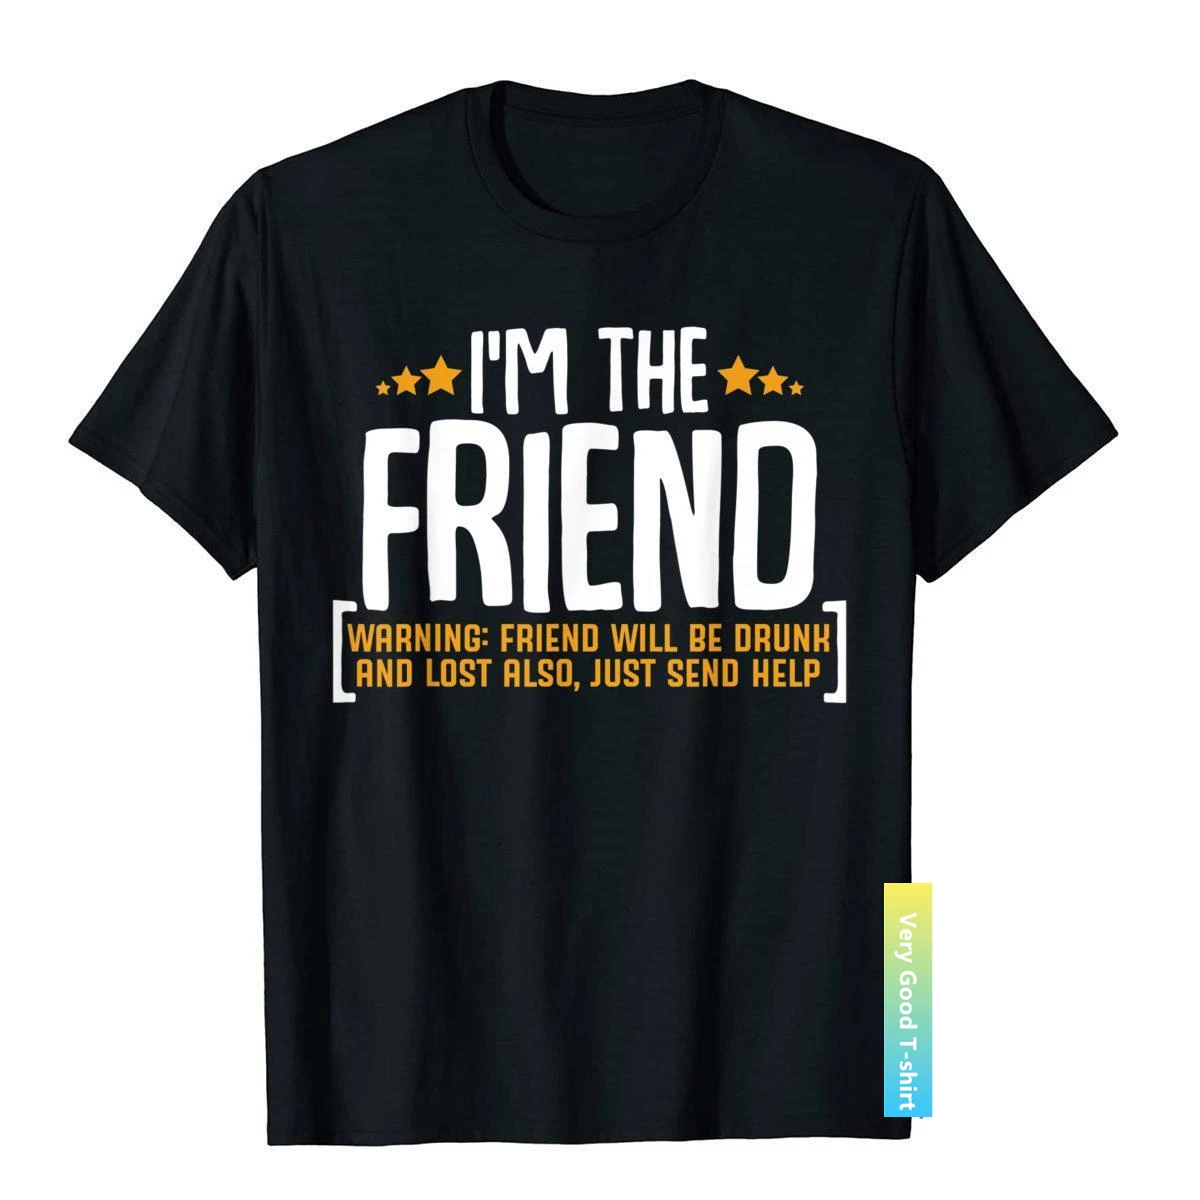 

If Lost Or Drunk Please Return To Friend Funny Drinking T-Shirt T Shirts Tops T Shirt Popular Cotton Family Novelty Man